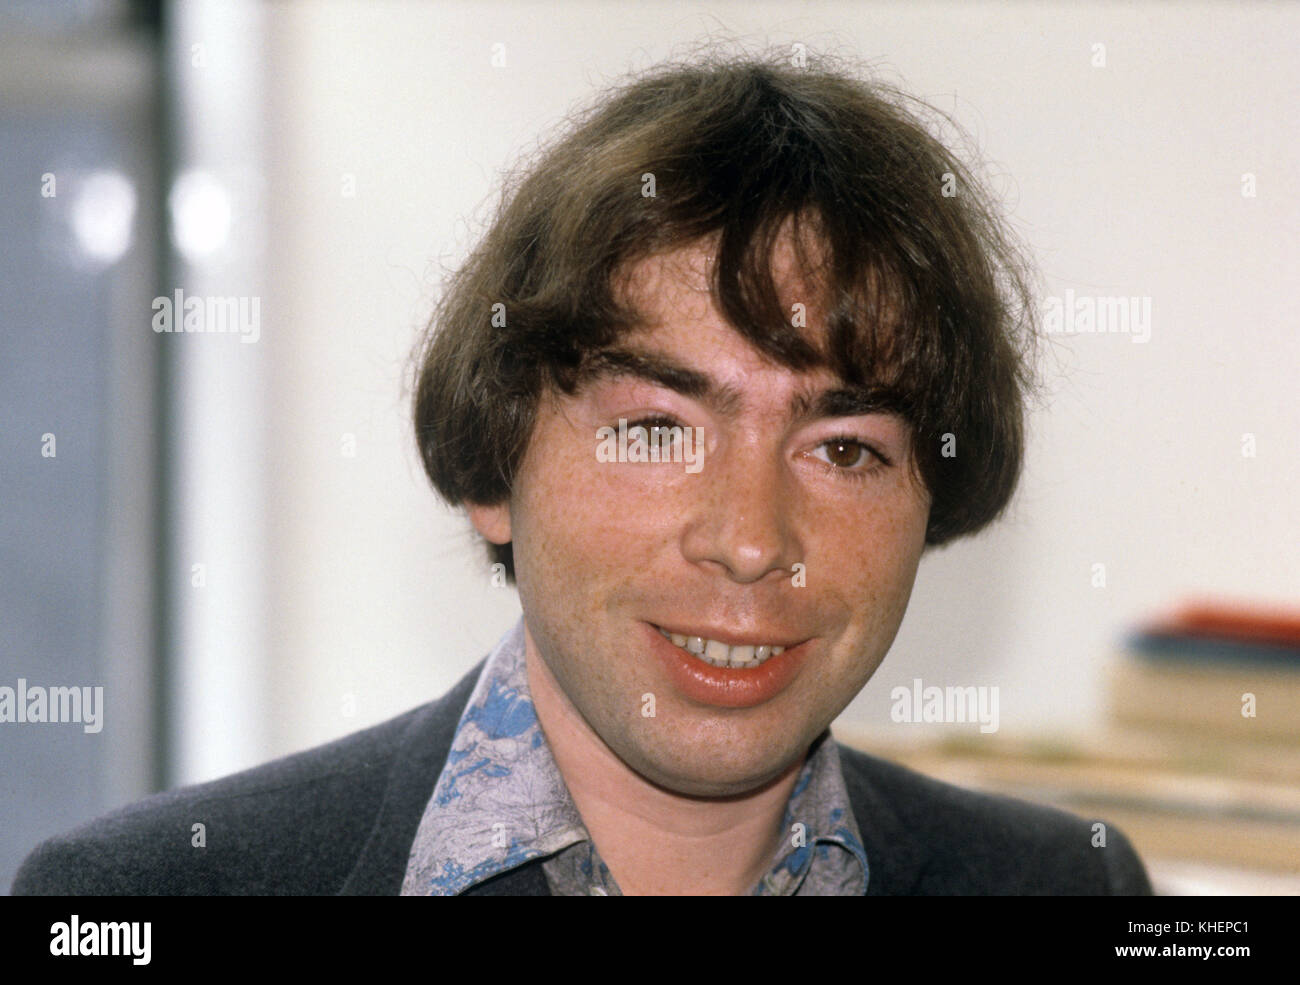 Andrew Lloyd Webber, who with Tim Rice, wrote the hit musicals Jesus Christ Superstar and Evita. Stock Photo